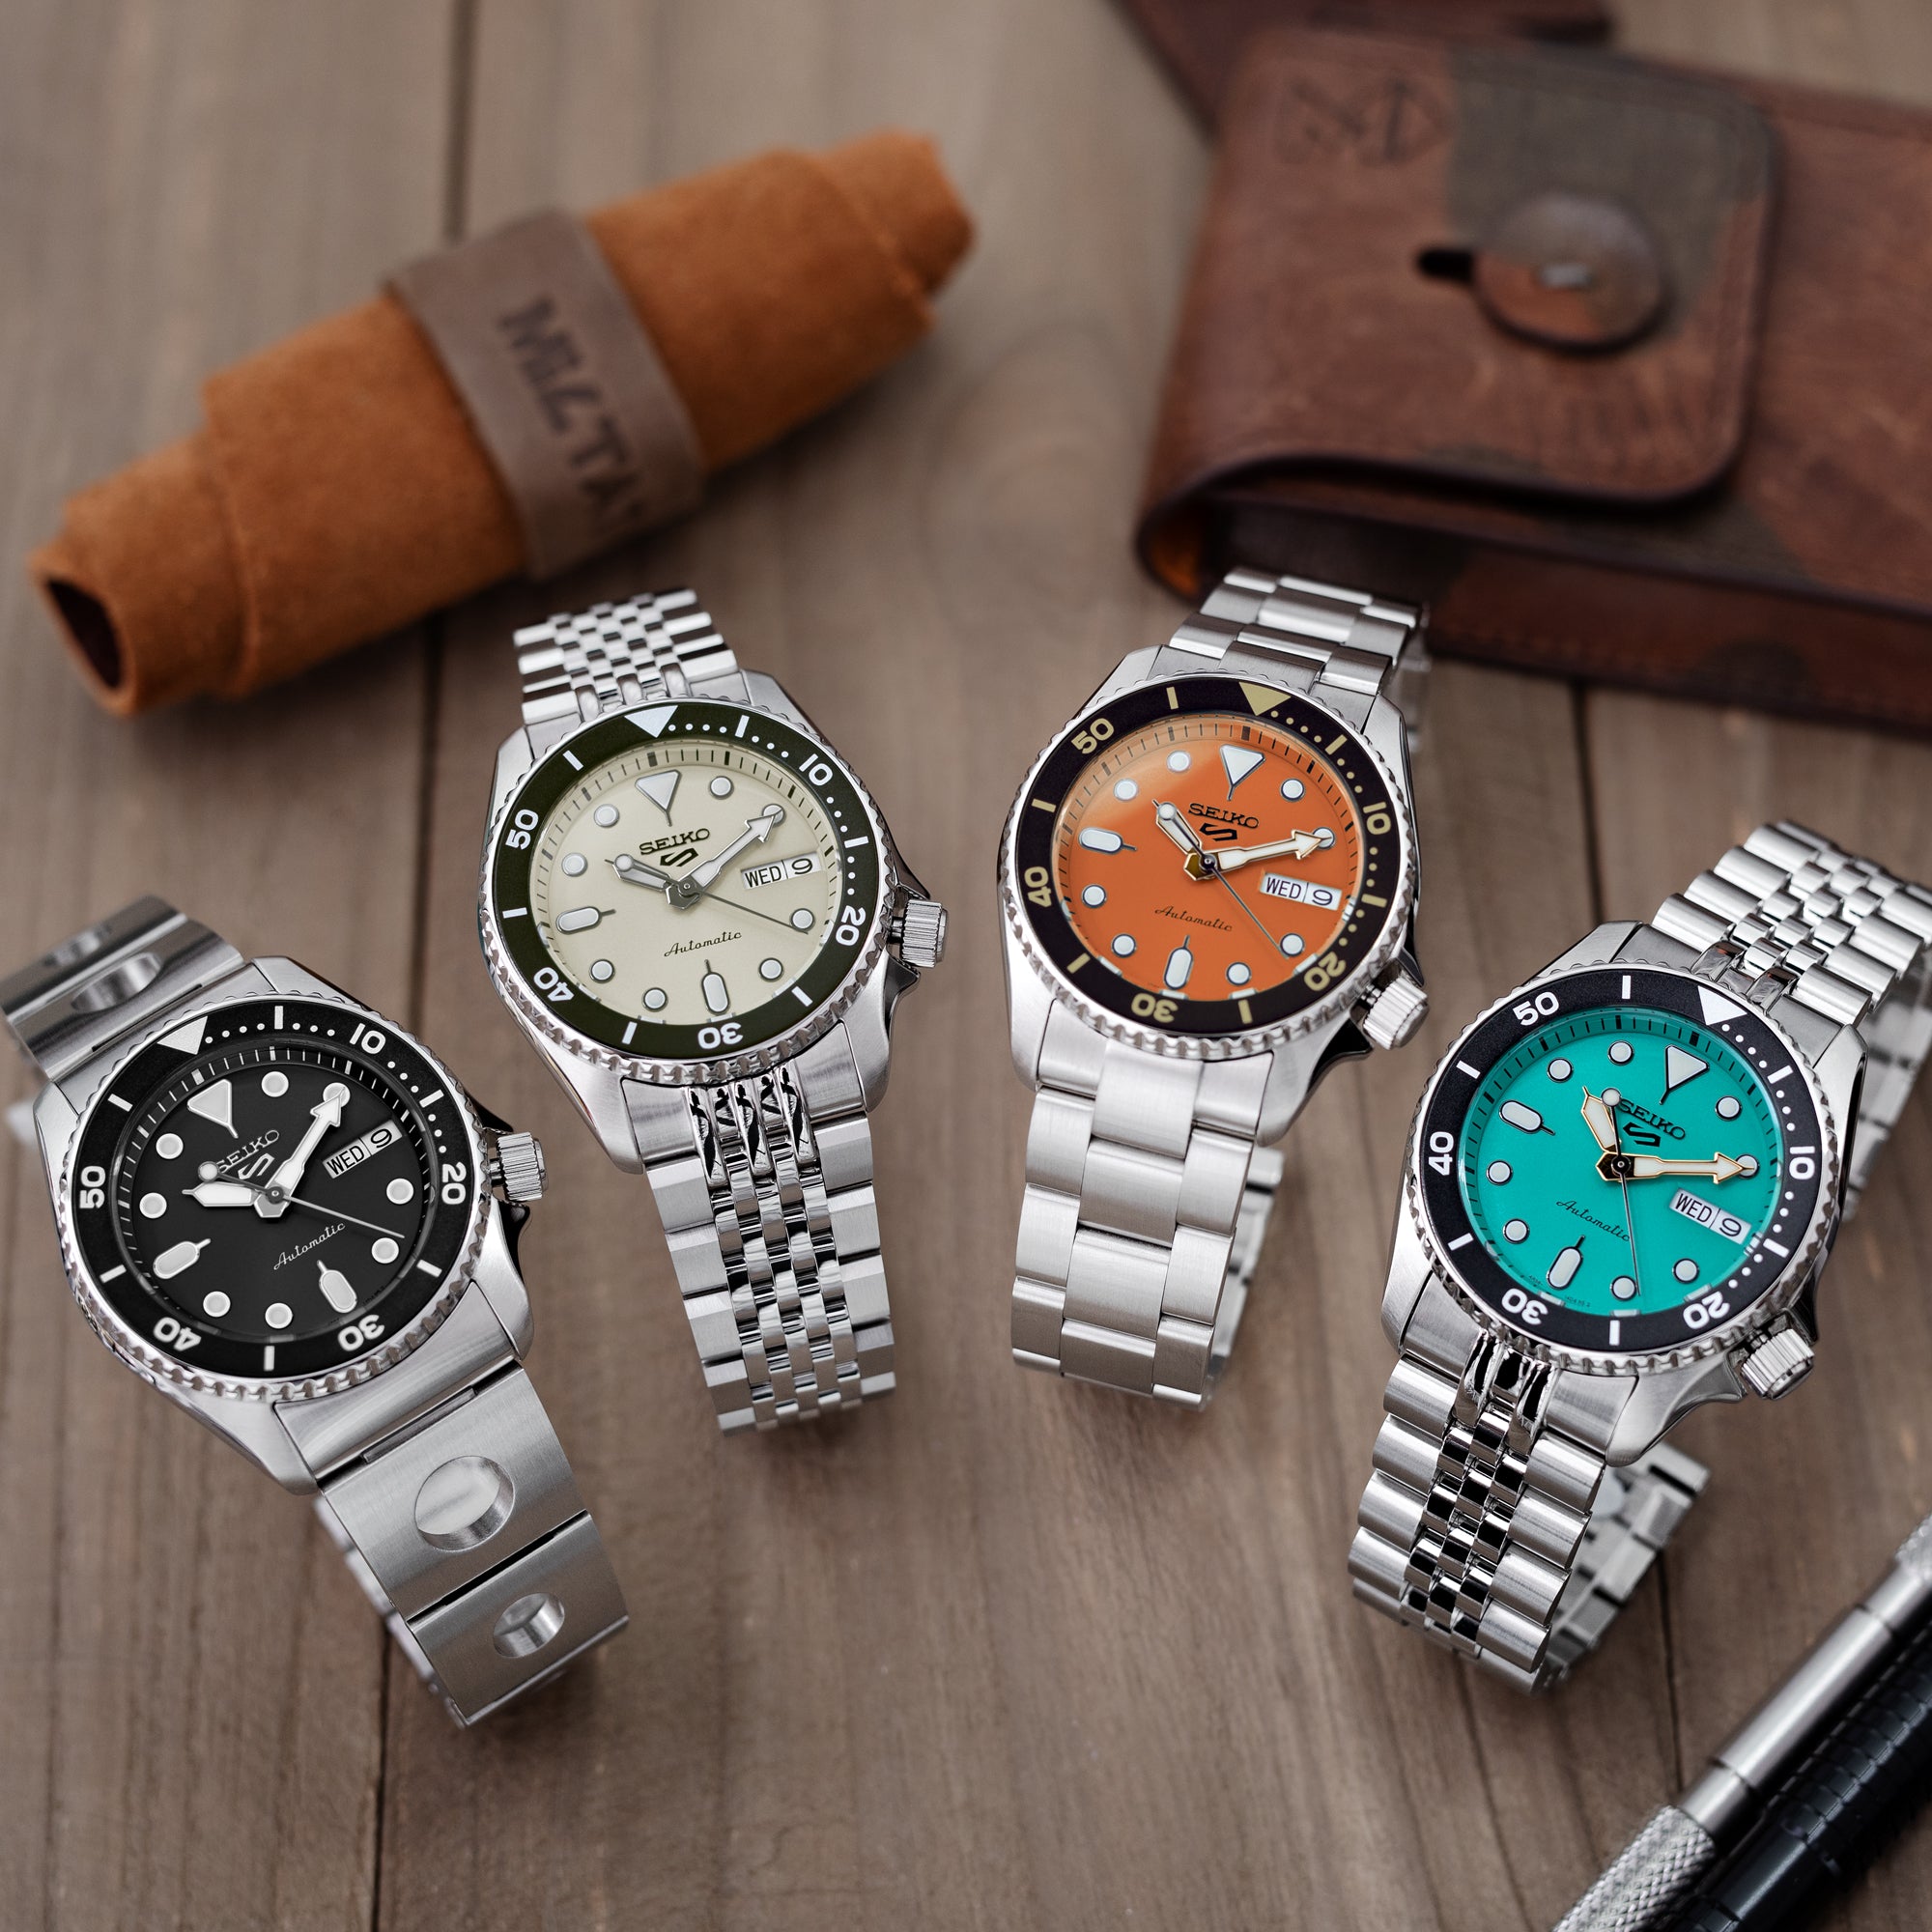 Seiko 5 Sports 38mm SRPK29, SRPK31, SRPK33, and SRPK35 fitted watch band upgrade by Strapcode